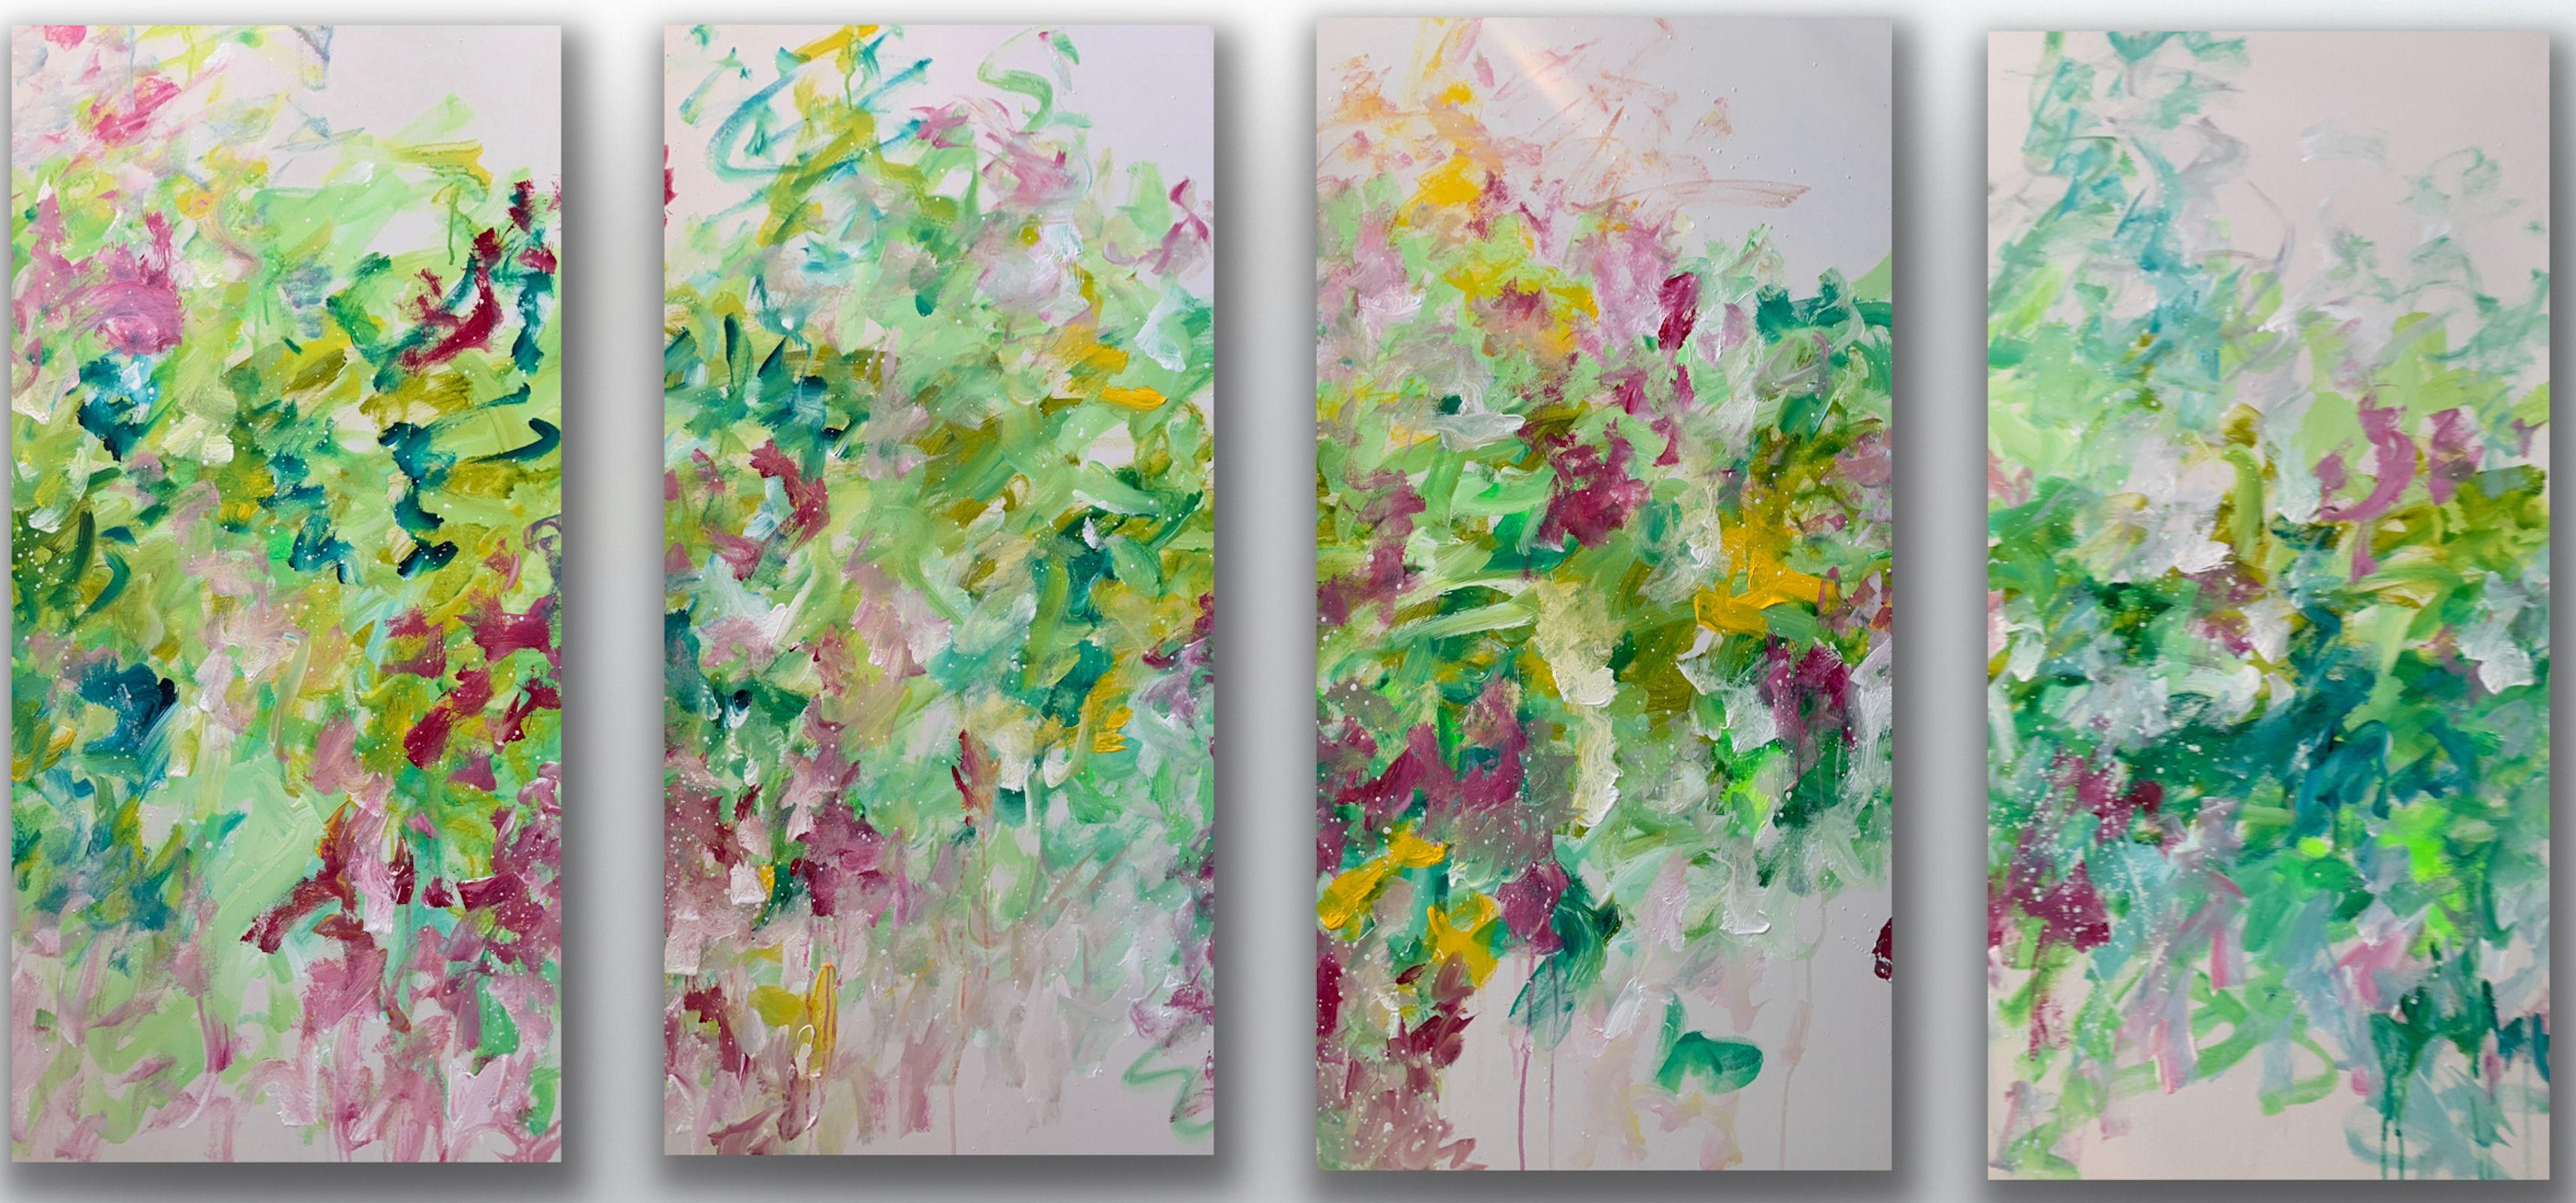 Inspiration was drawn from Summer garden spaces and Joan Mitchell's brushstrokes.     This artist's first quadtych and hopefully the first of many more gives the illusion of being right in the garden.   Each canvas is 24"x 48" so the total width